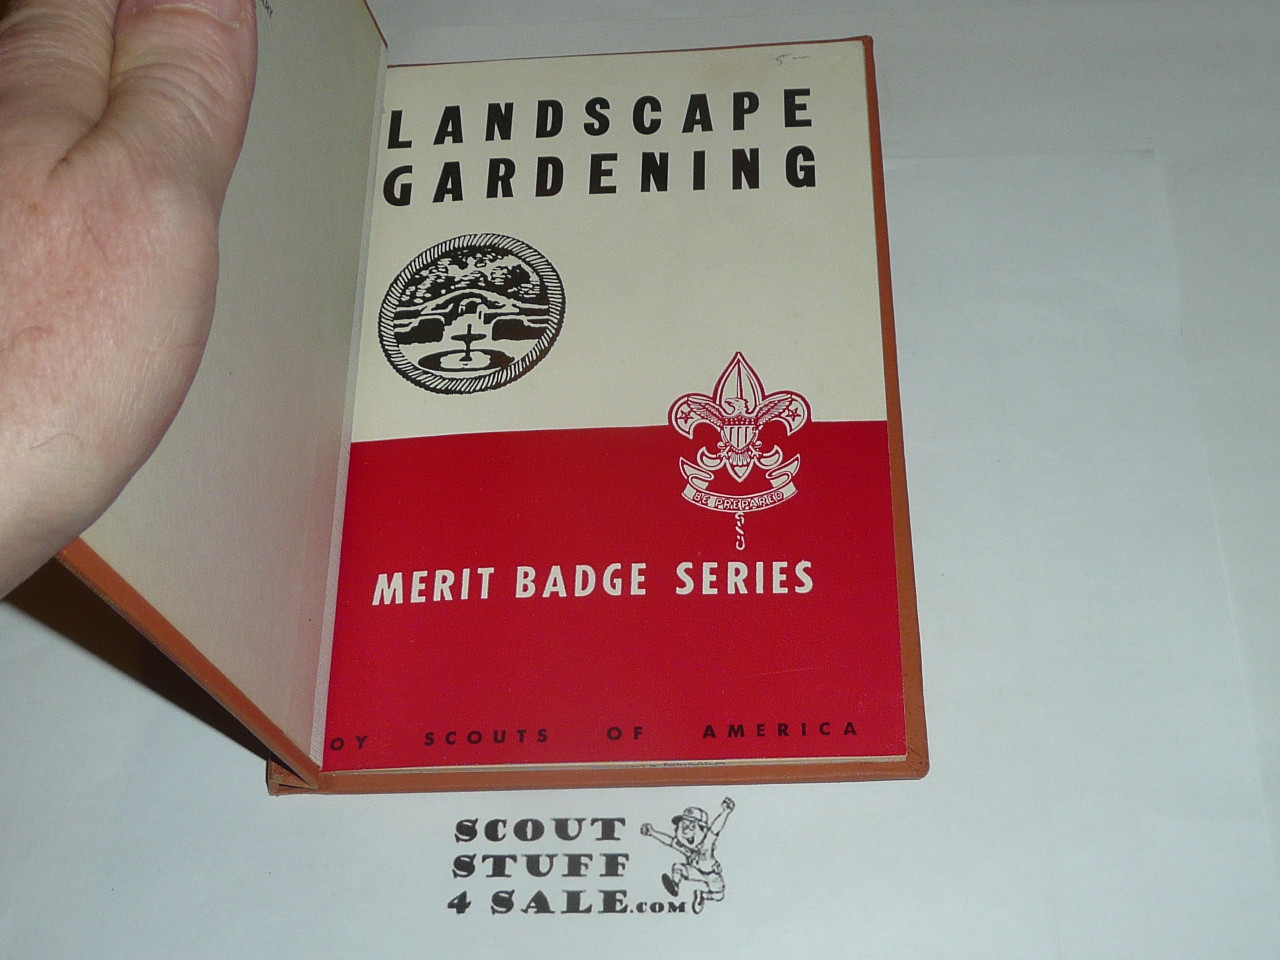 Landscape Gardening Library Bound Merit Badge Pamphlet, Type 5, Red/Wht Cover, 9-51 Printing